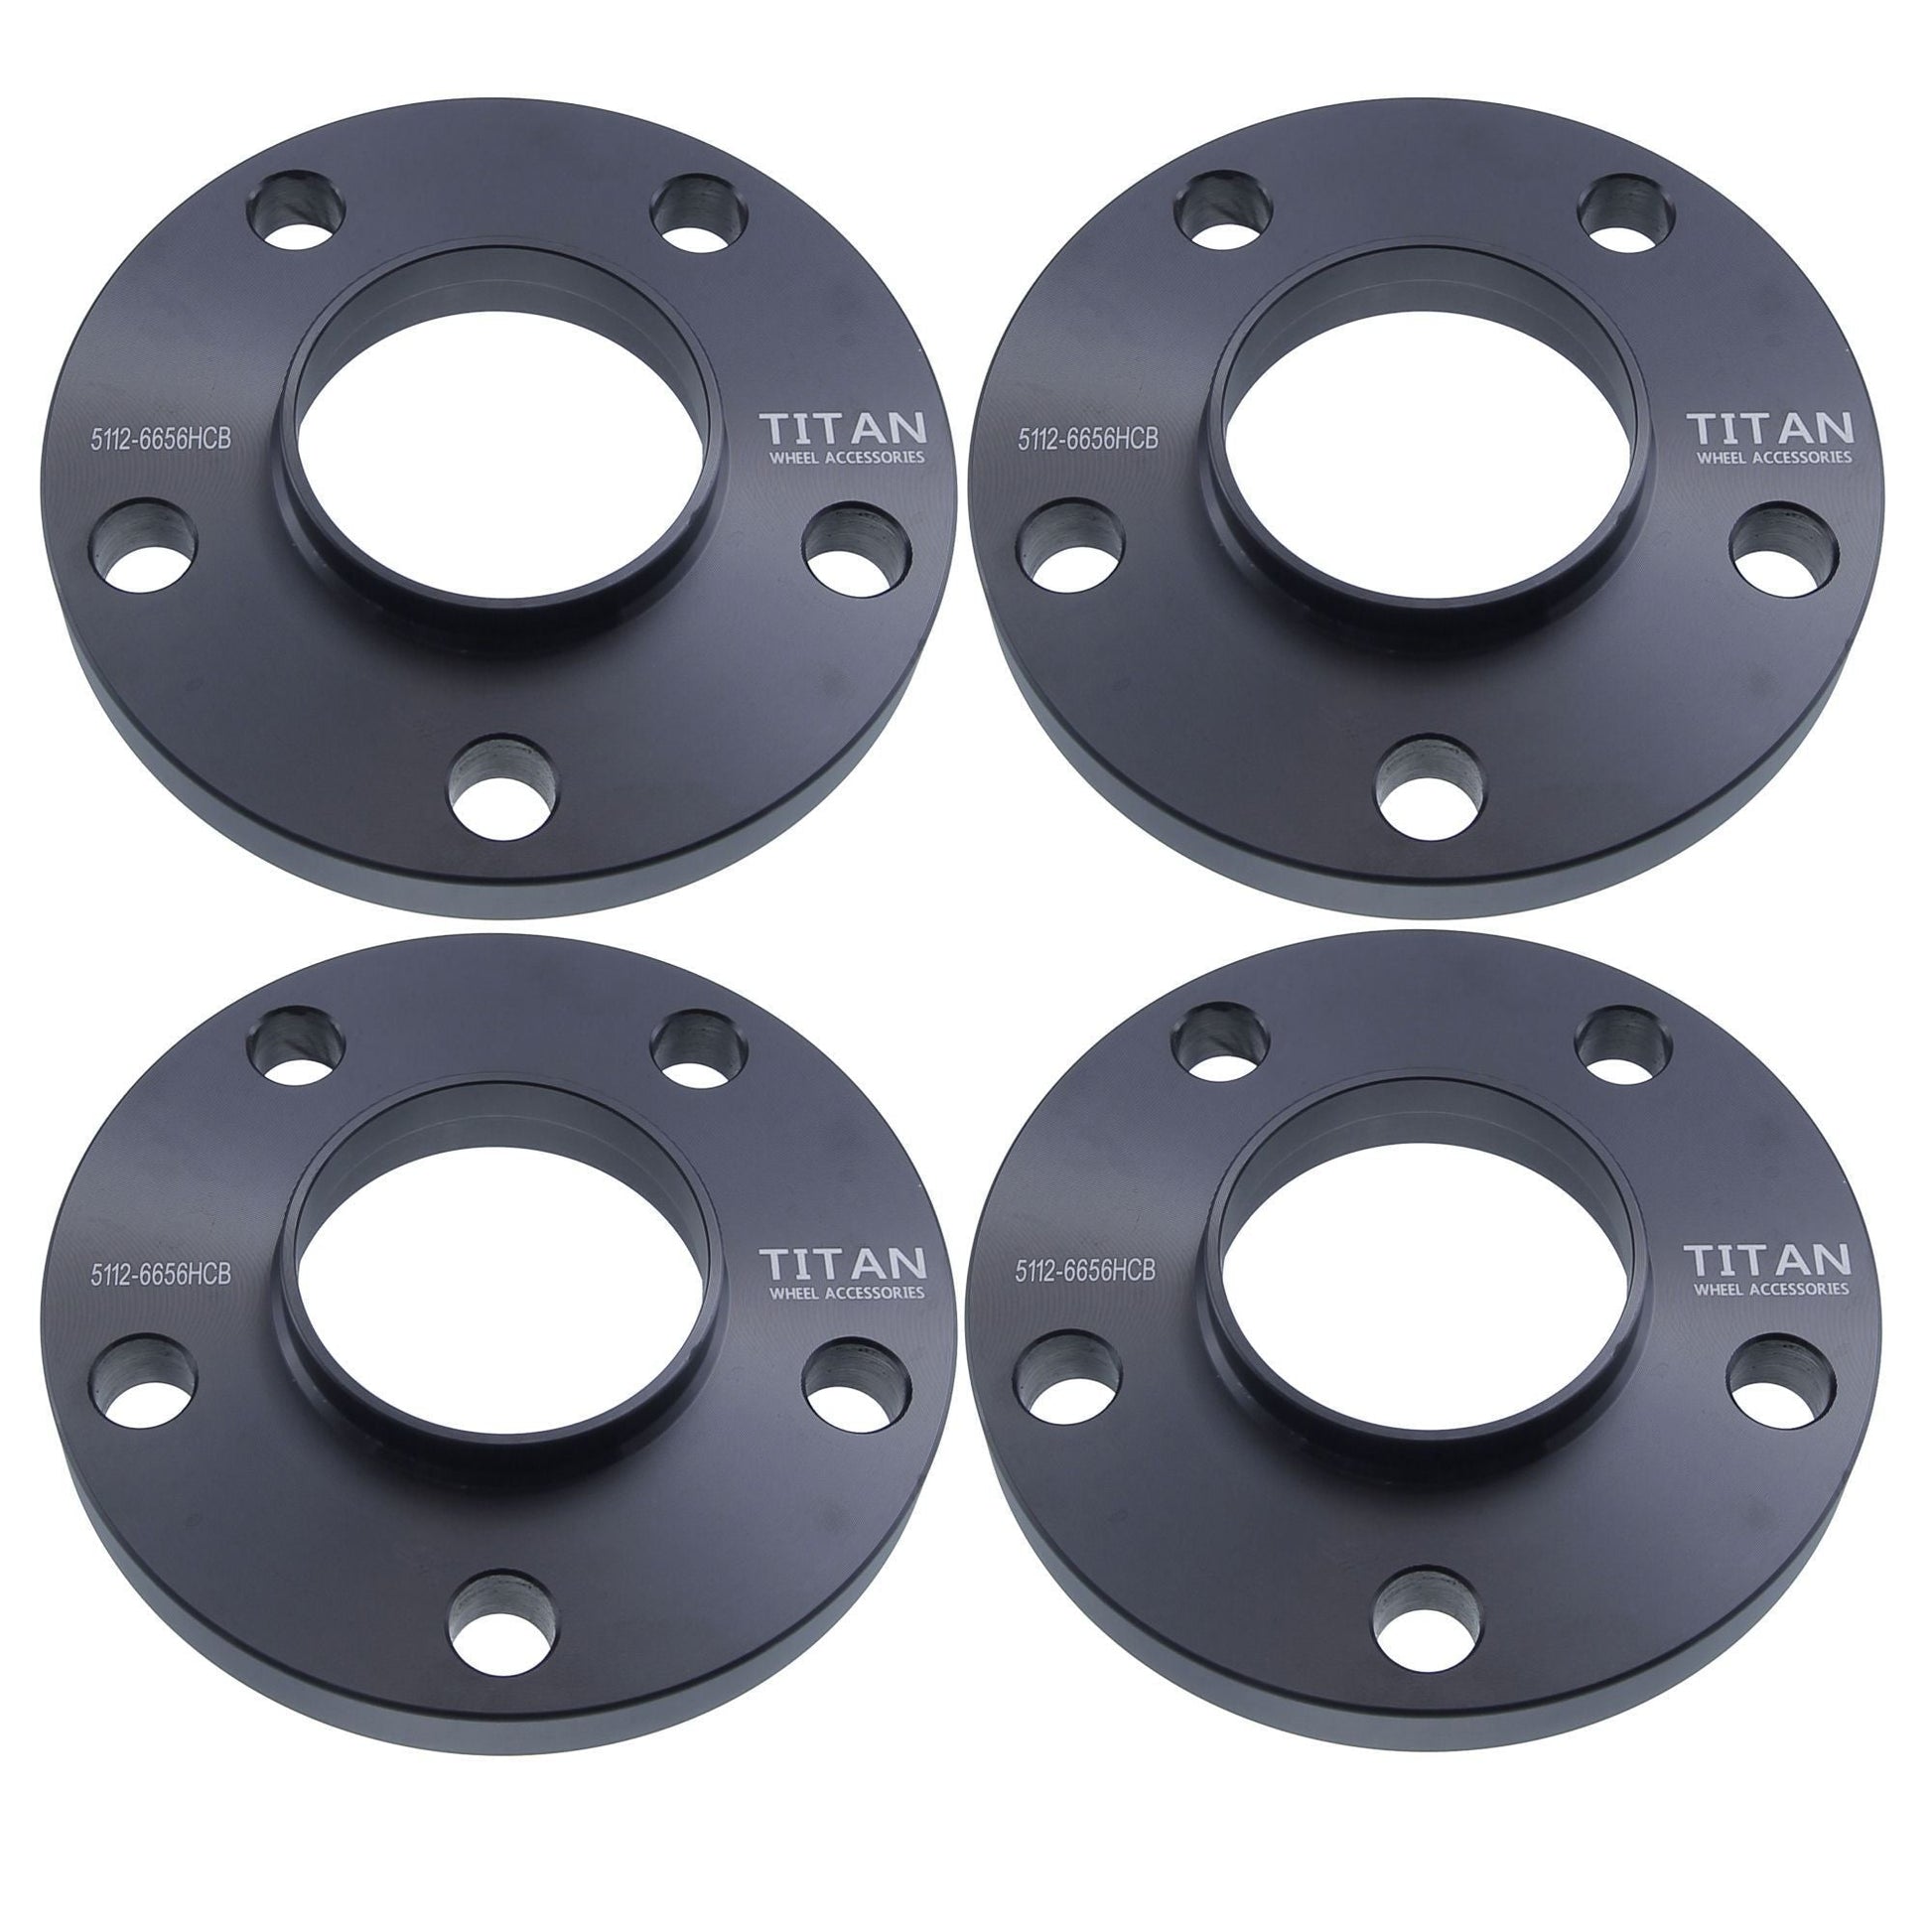 25mm (1") Titan Wheel Spacers for VW Audi Mercedes | 5x112 | 66.56 Hubcentric | Set of 4 | Titan Wheel Accessories